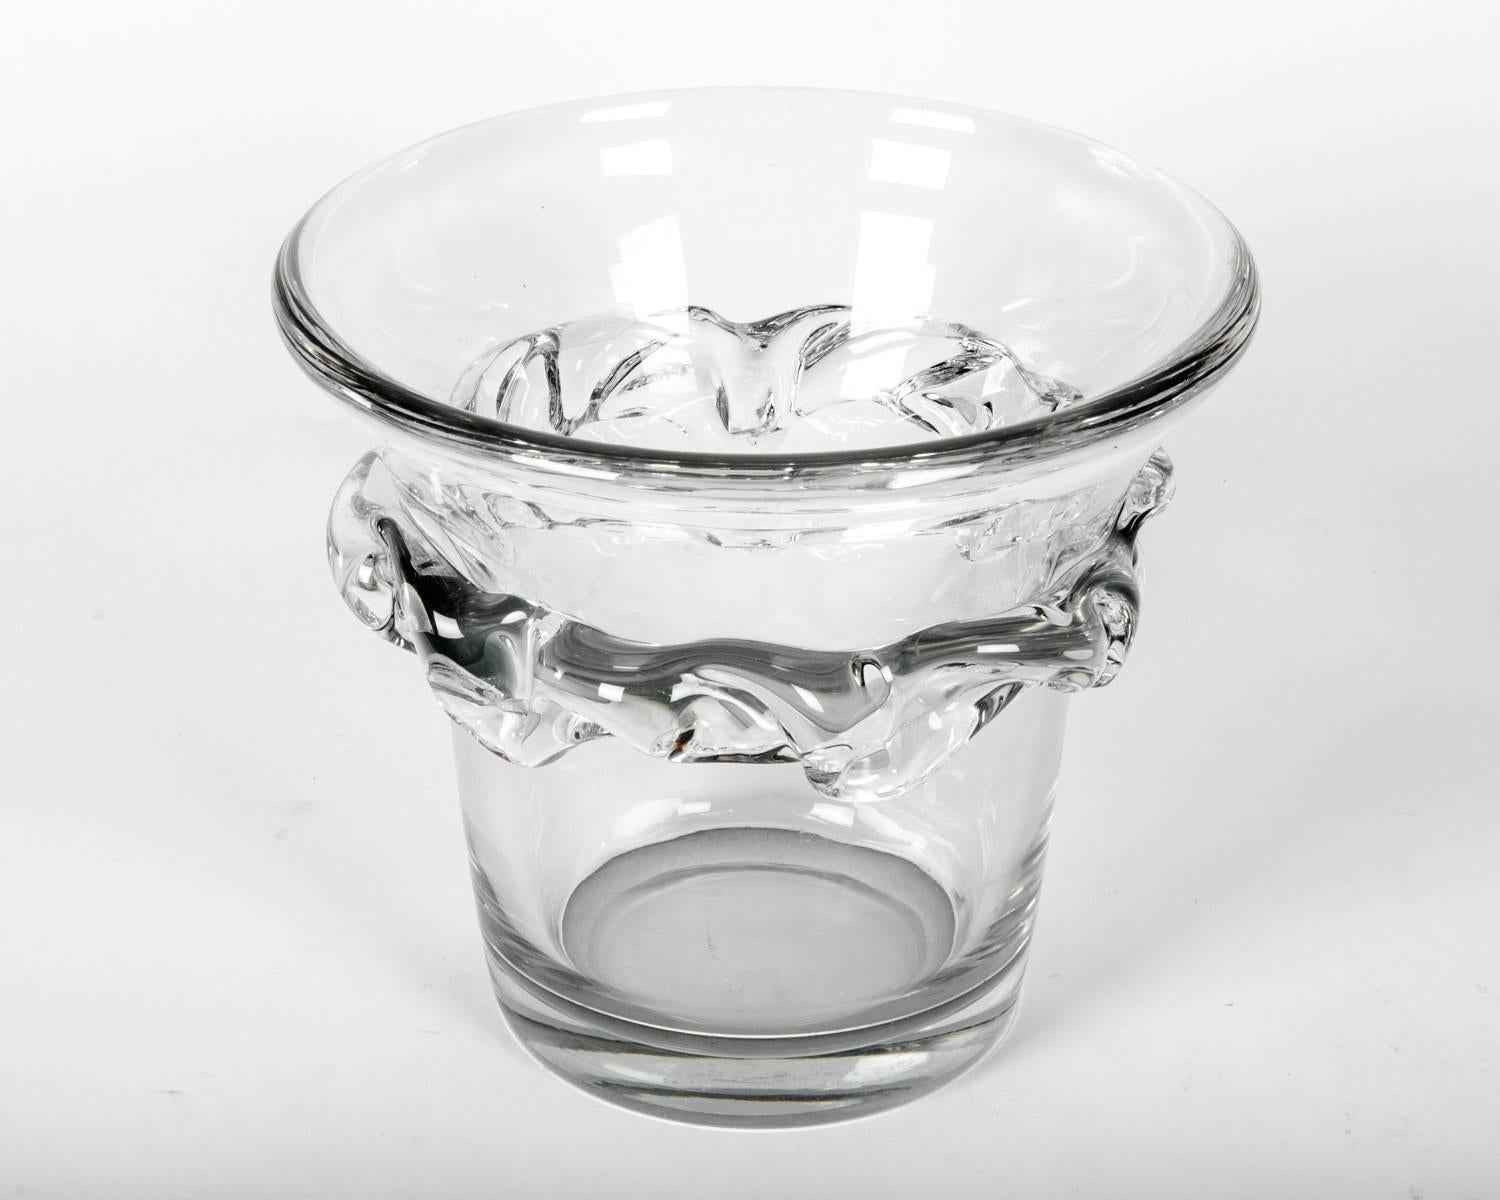 Large vintage ice bucket from the famed maker, Daum. Etched by Daum. Decorative crystal abstract element on the exterior. Measures: 9 inches tall and 10 inches wide.